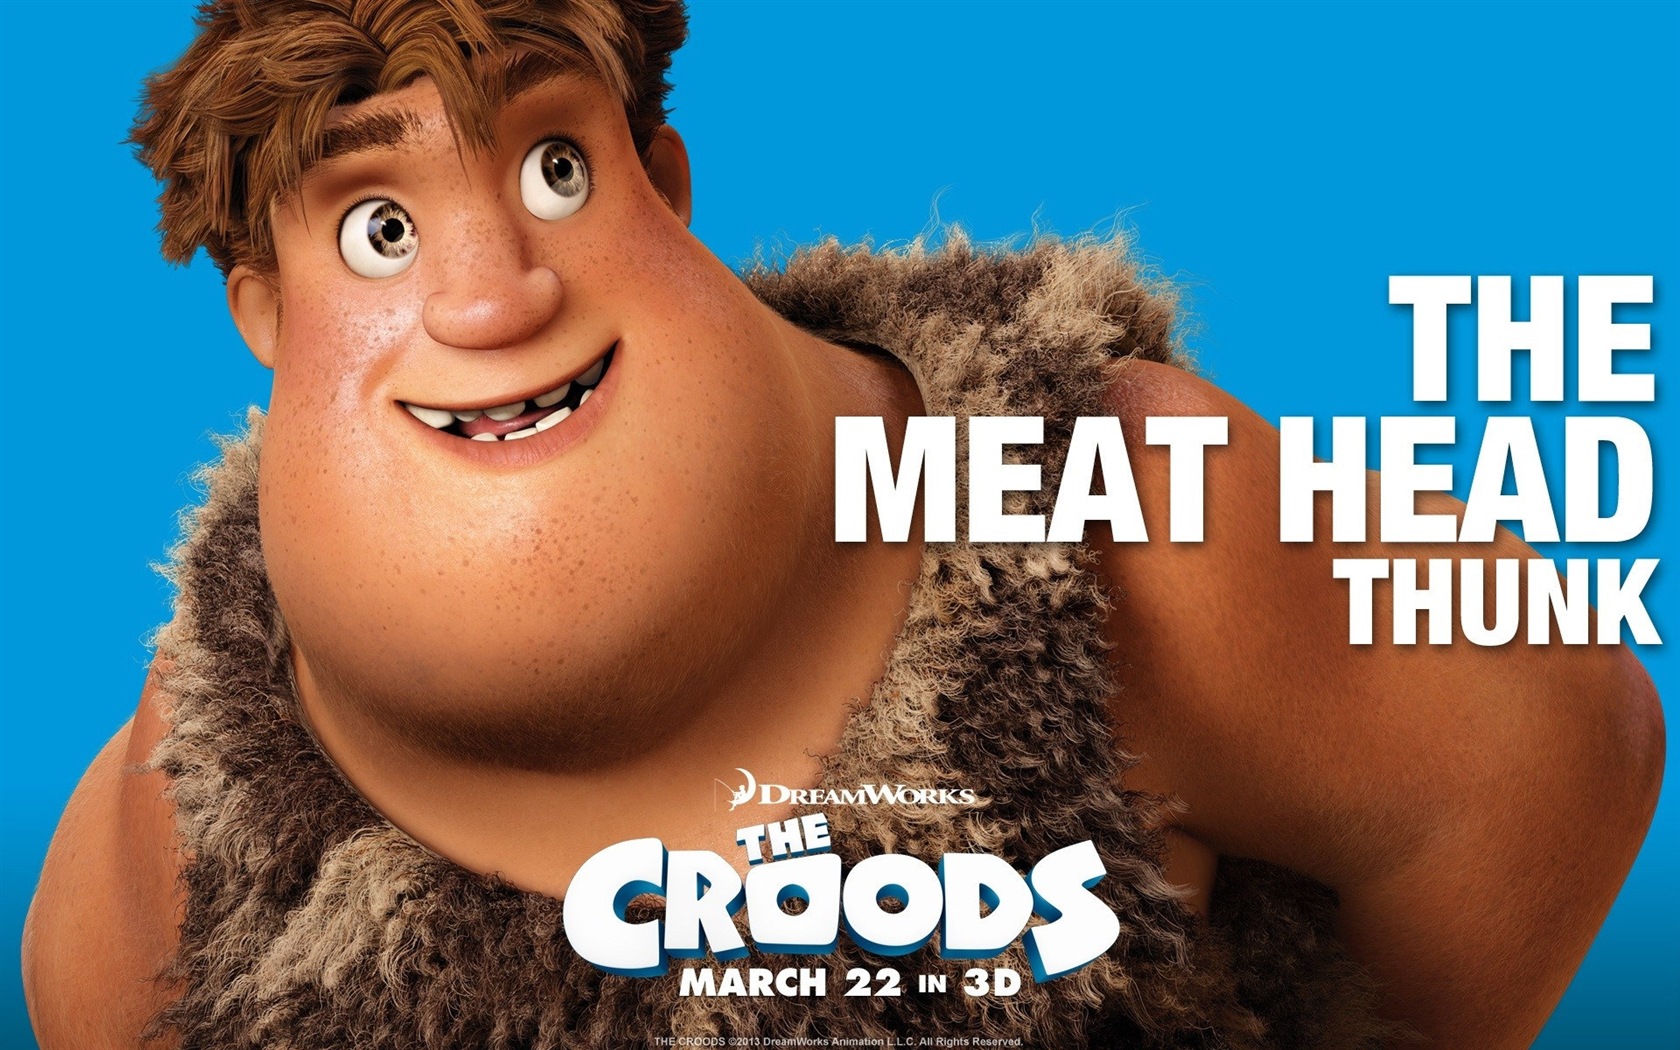 V Croods HD Movie Wallpapers #13 - 1680x1050